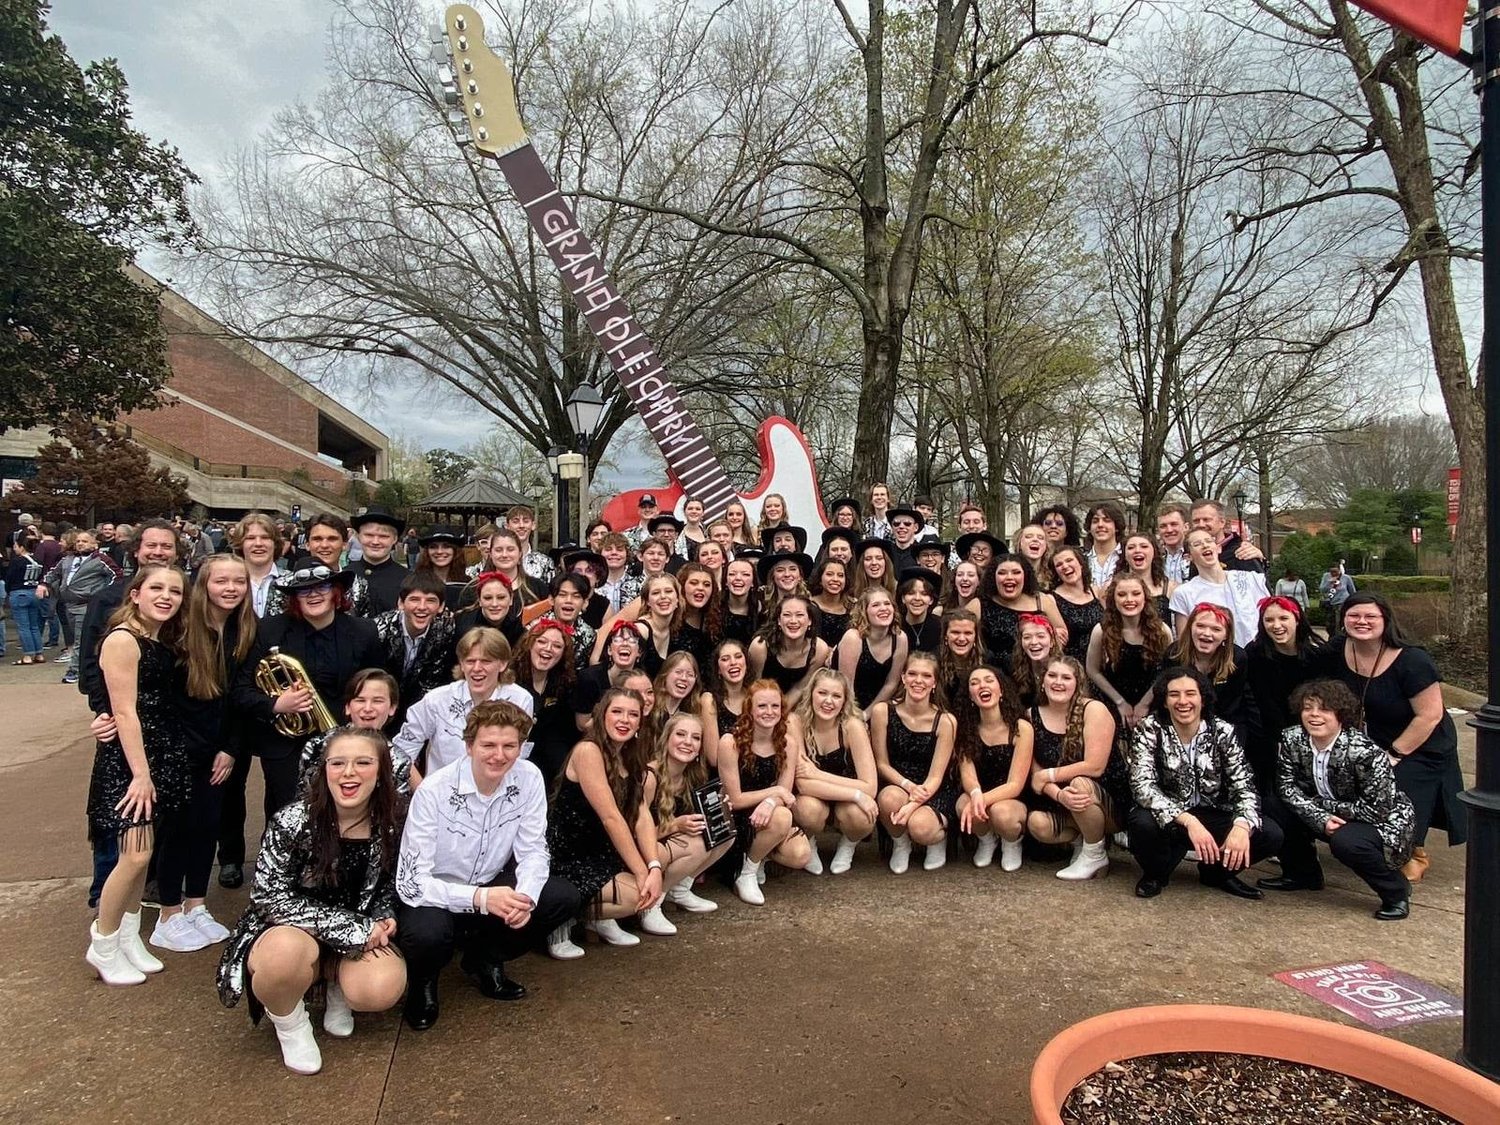 Riverside was caught kickin’ it out side the Grand Ole Opry in Nashville, TN for the Show Choir Nationals competition where the group placed fourth out of 11 schools.